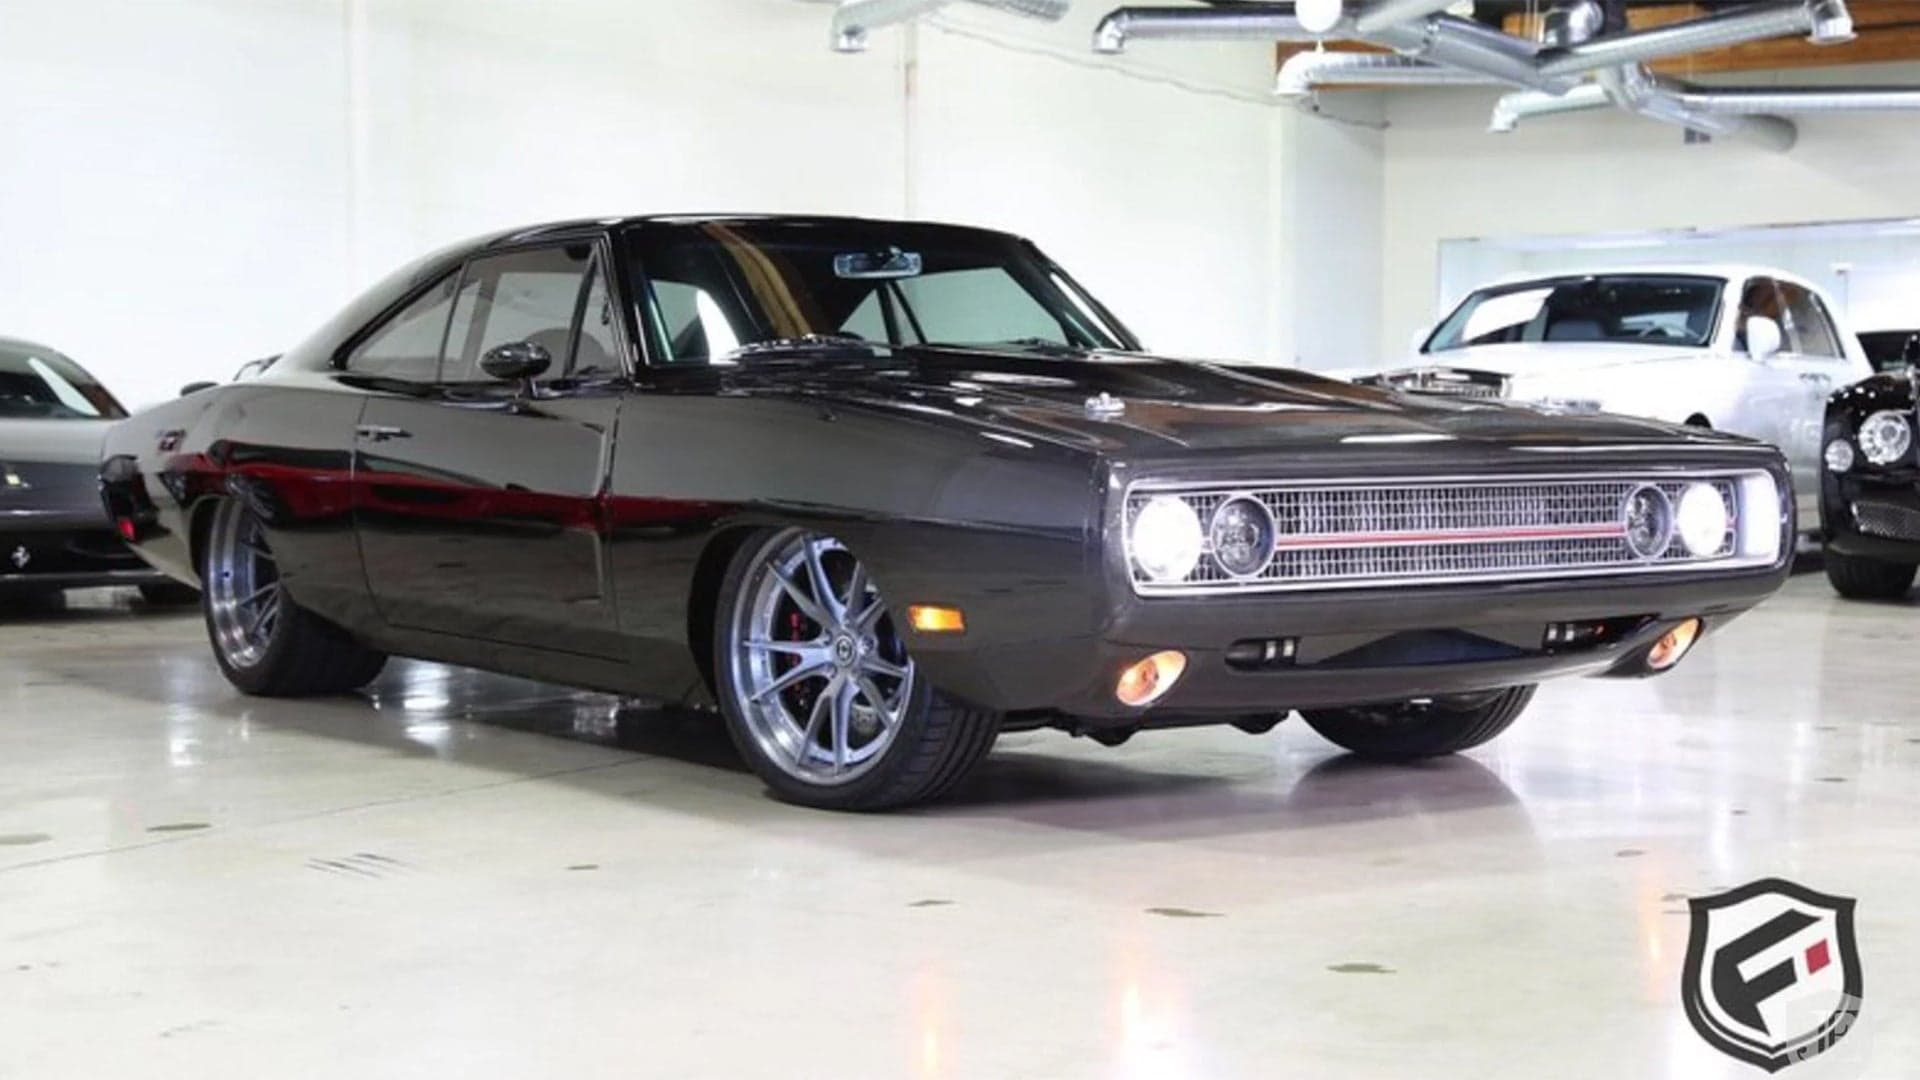 This $699K, 1,650-HP, Carbon-Fiber 1970 Dodge Charger Packs a Racing Boat Engine